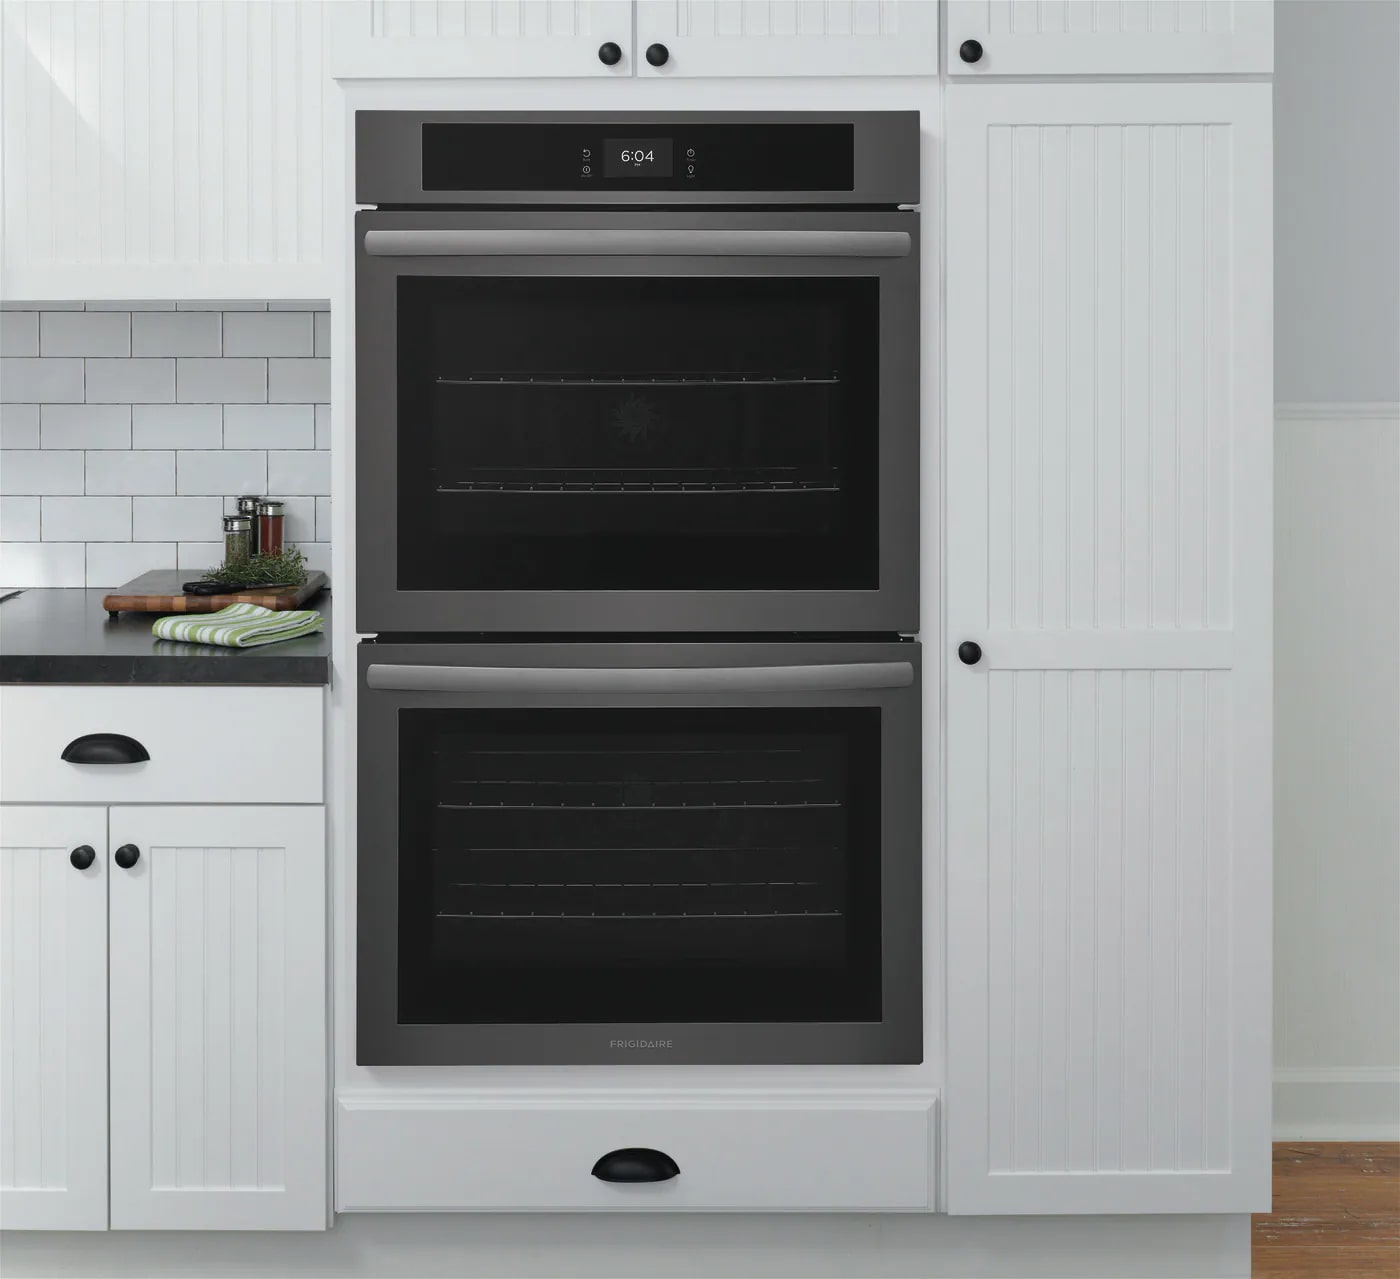 Frigidaire - 10.6 cu. ft Double Wall Oven in Black Stainless - FCWD3027AD